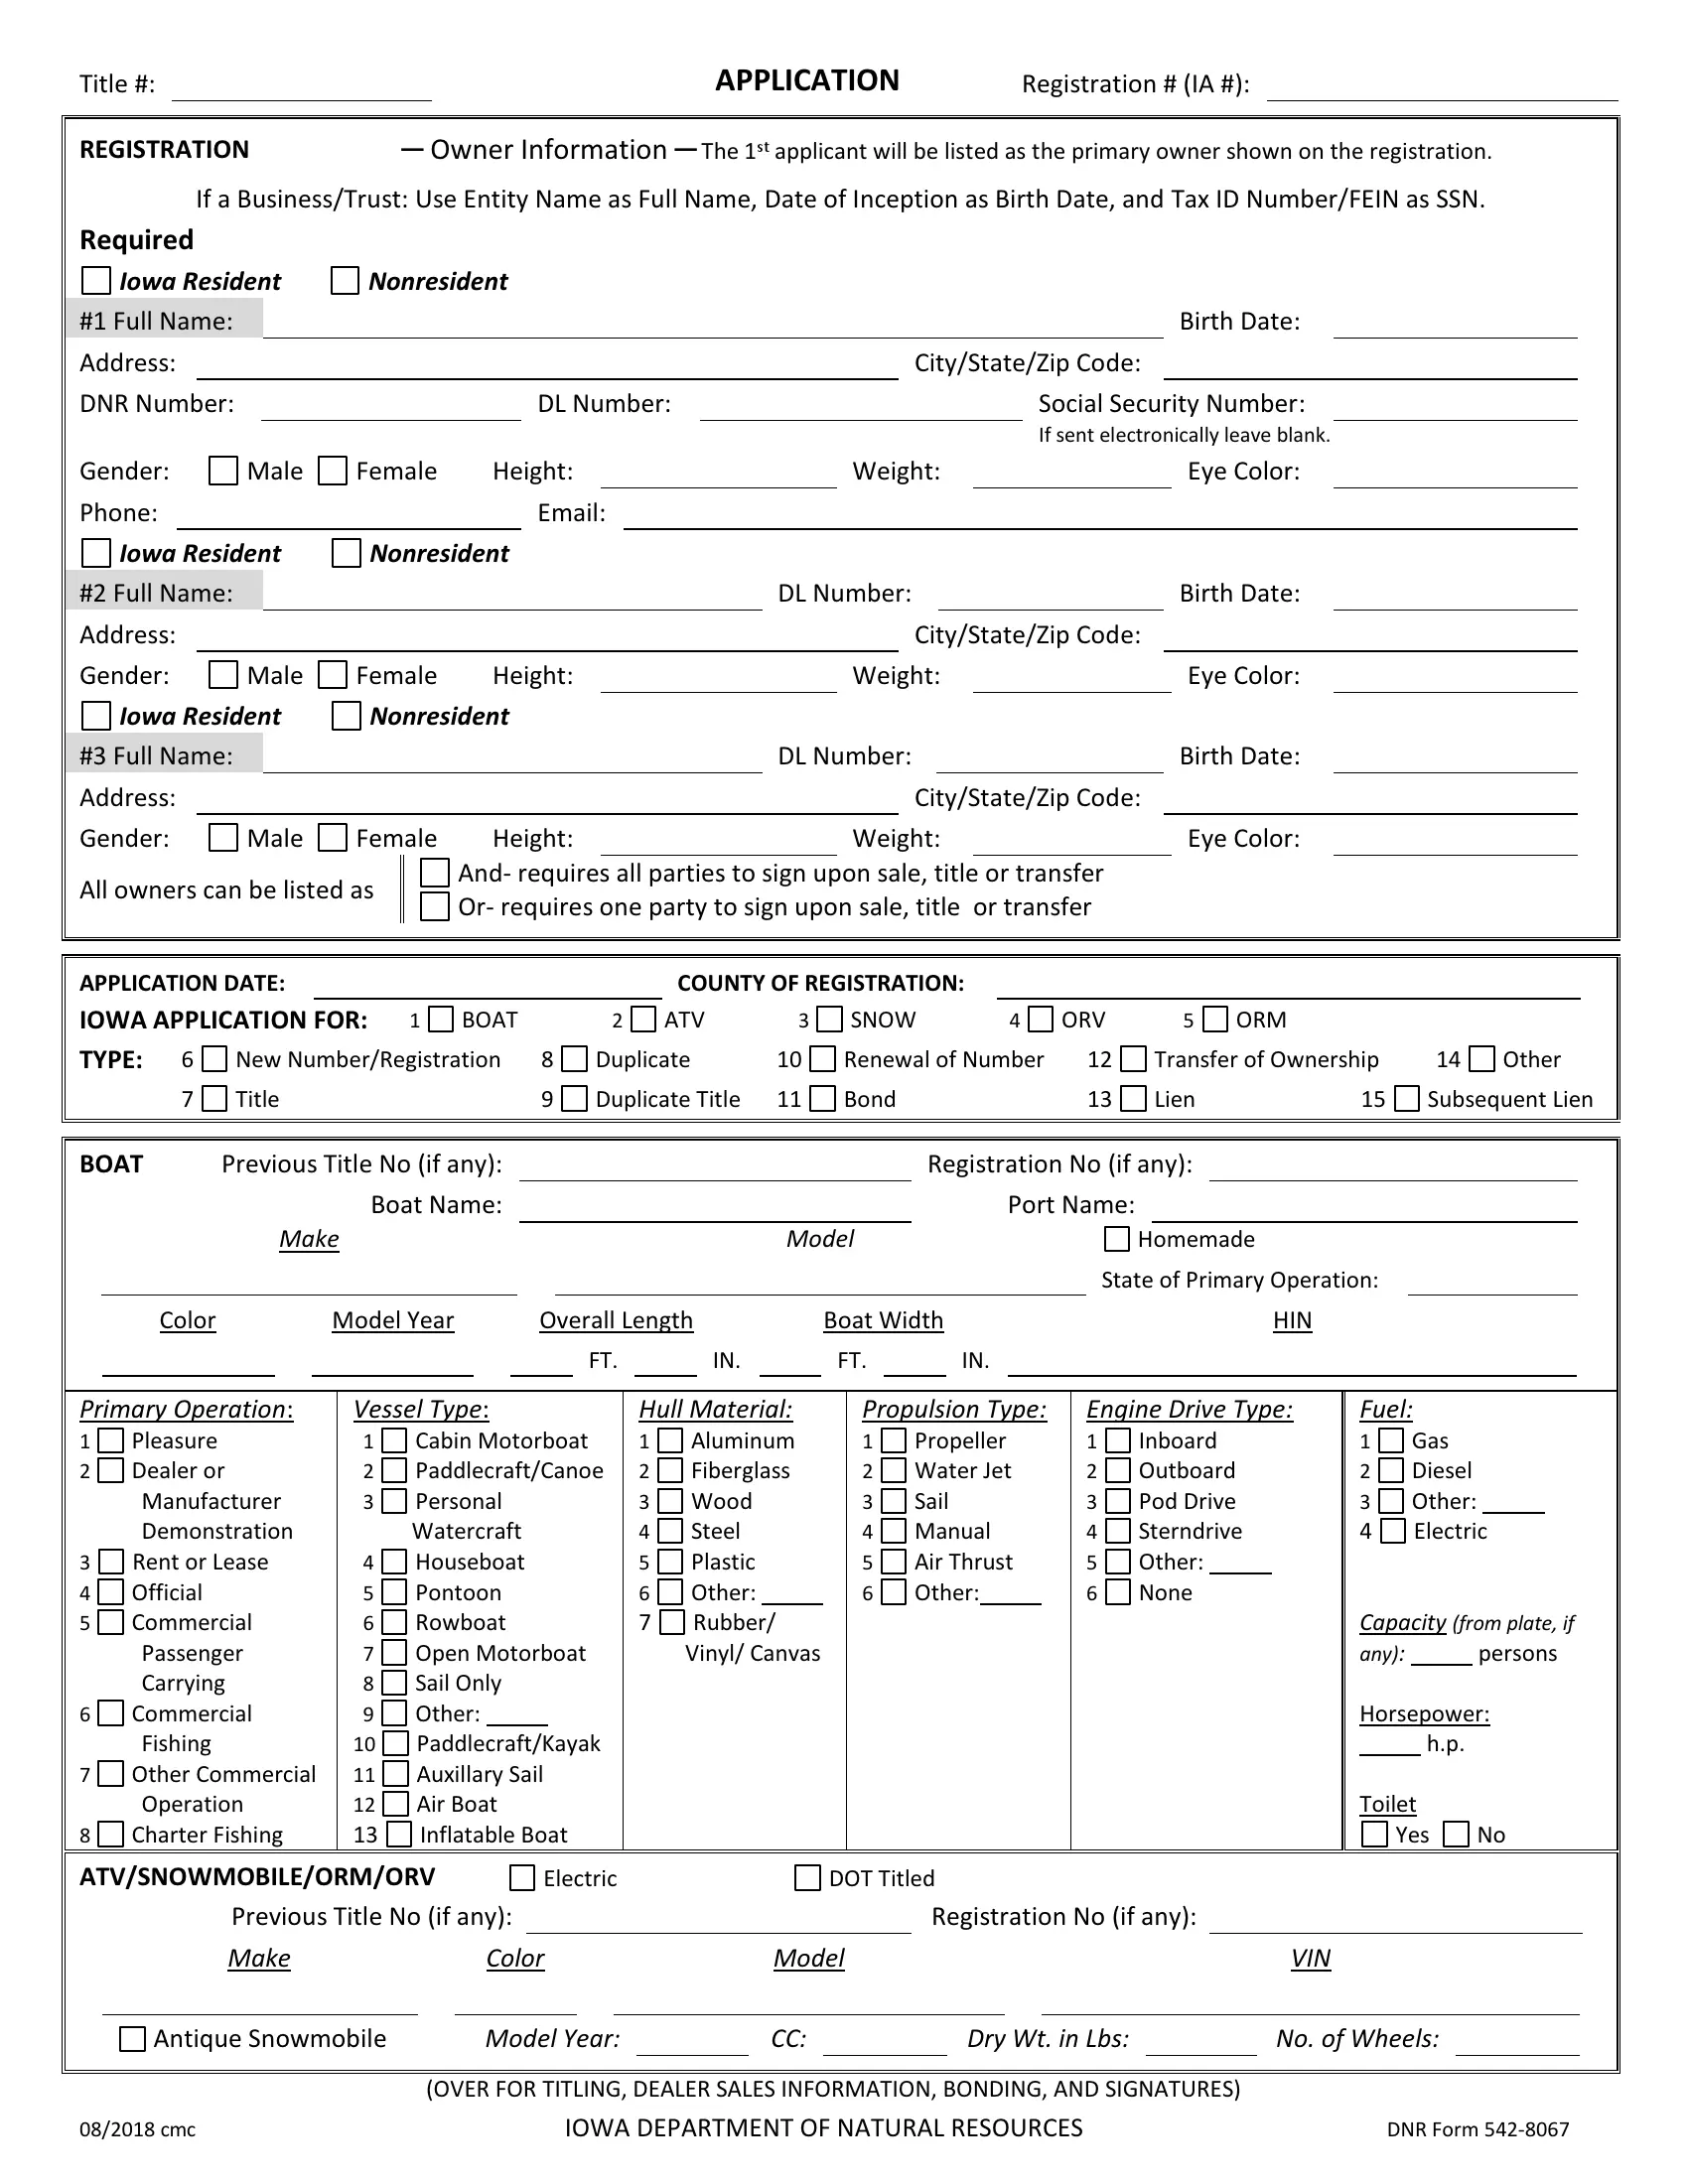 (Boat) Form 542-8067